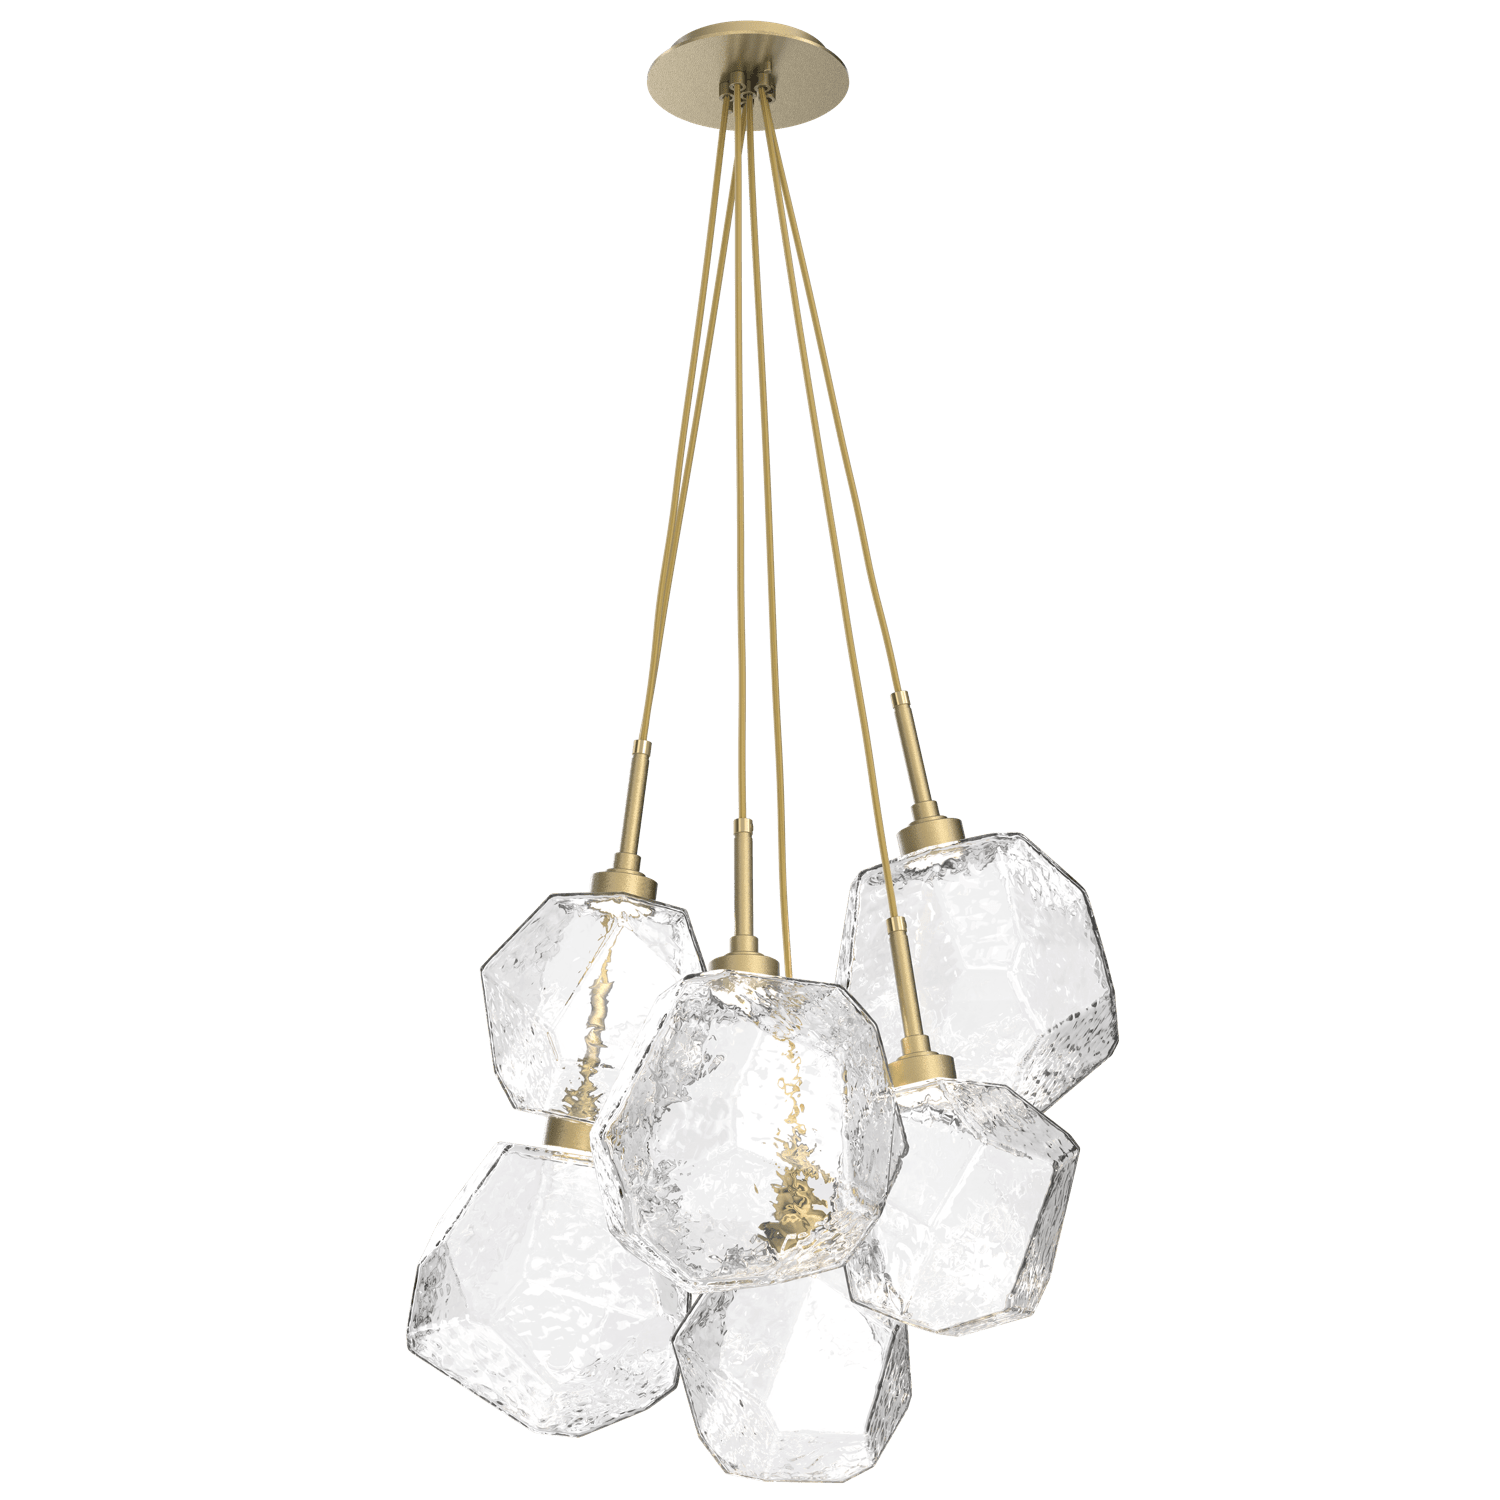 CHB0039-0F-GB-C-Hammerton-Studio-Gem-6-light-cluster-pendant-light-with-gilded-brass-finish-and-clear-blown-glass-shades-and-LED-lamping